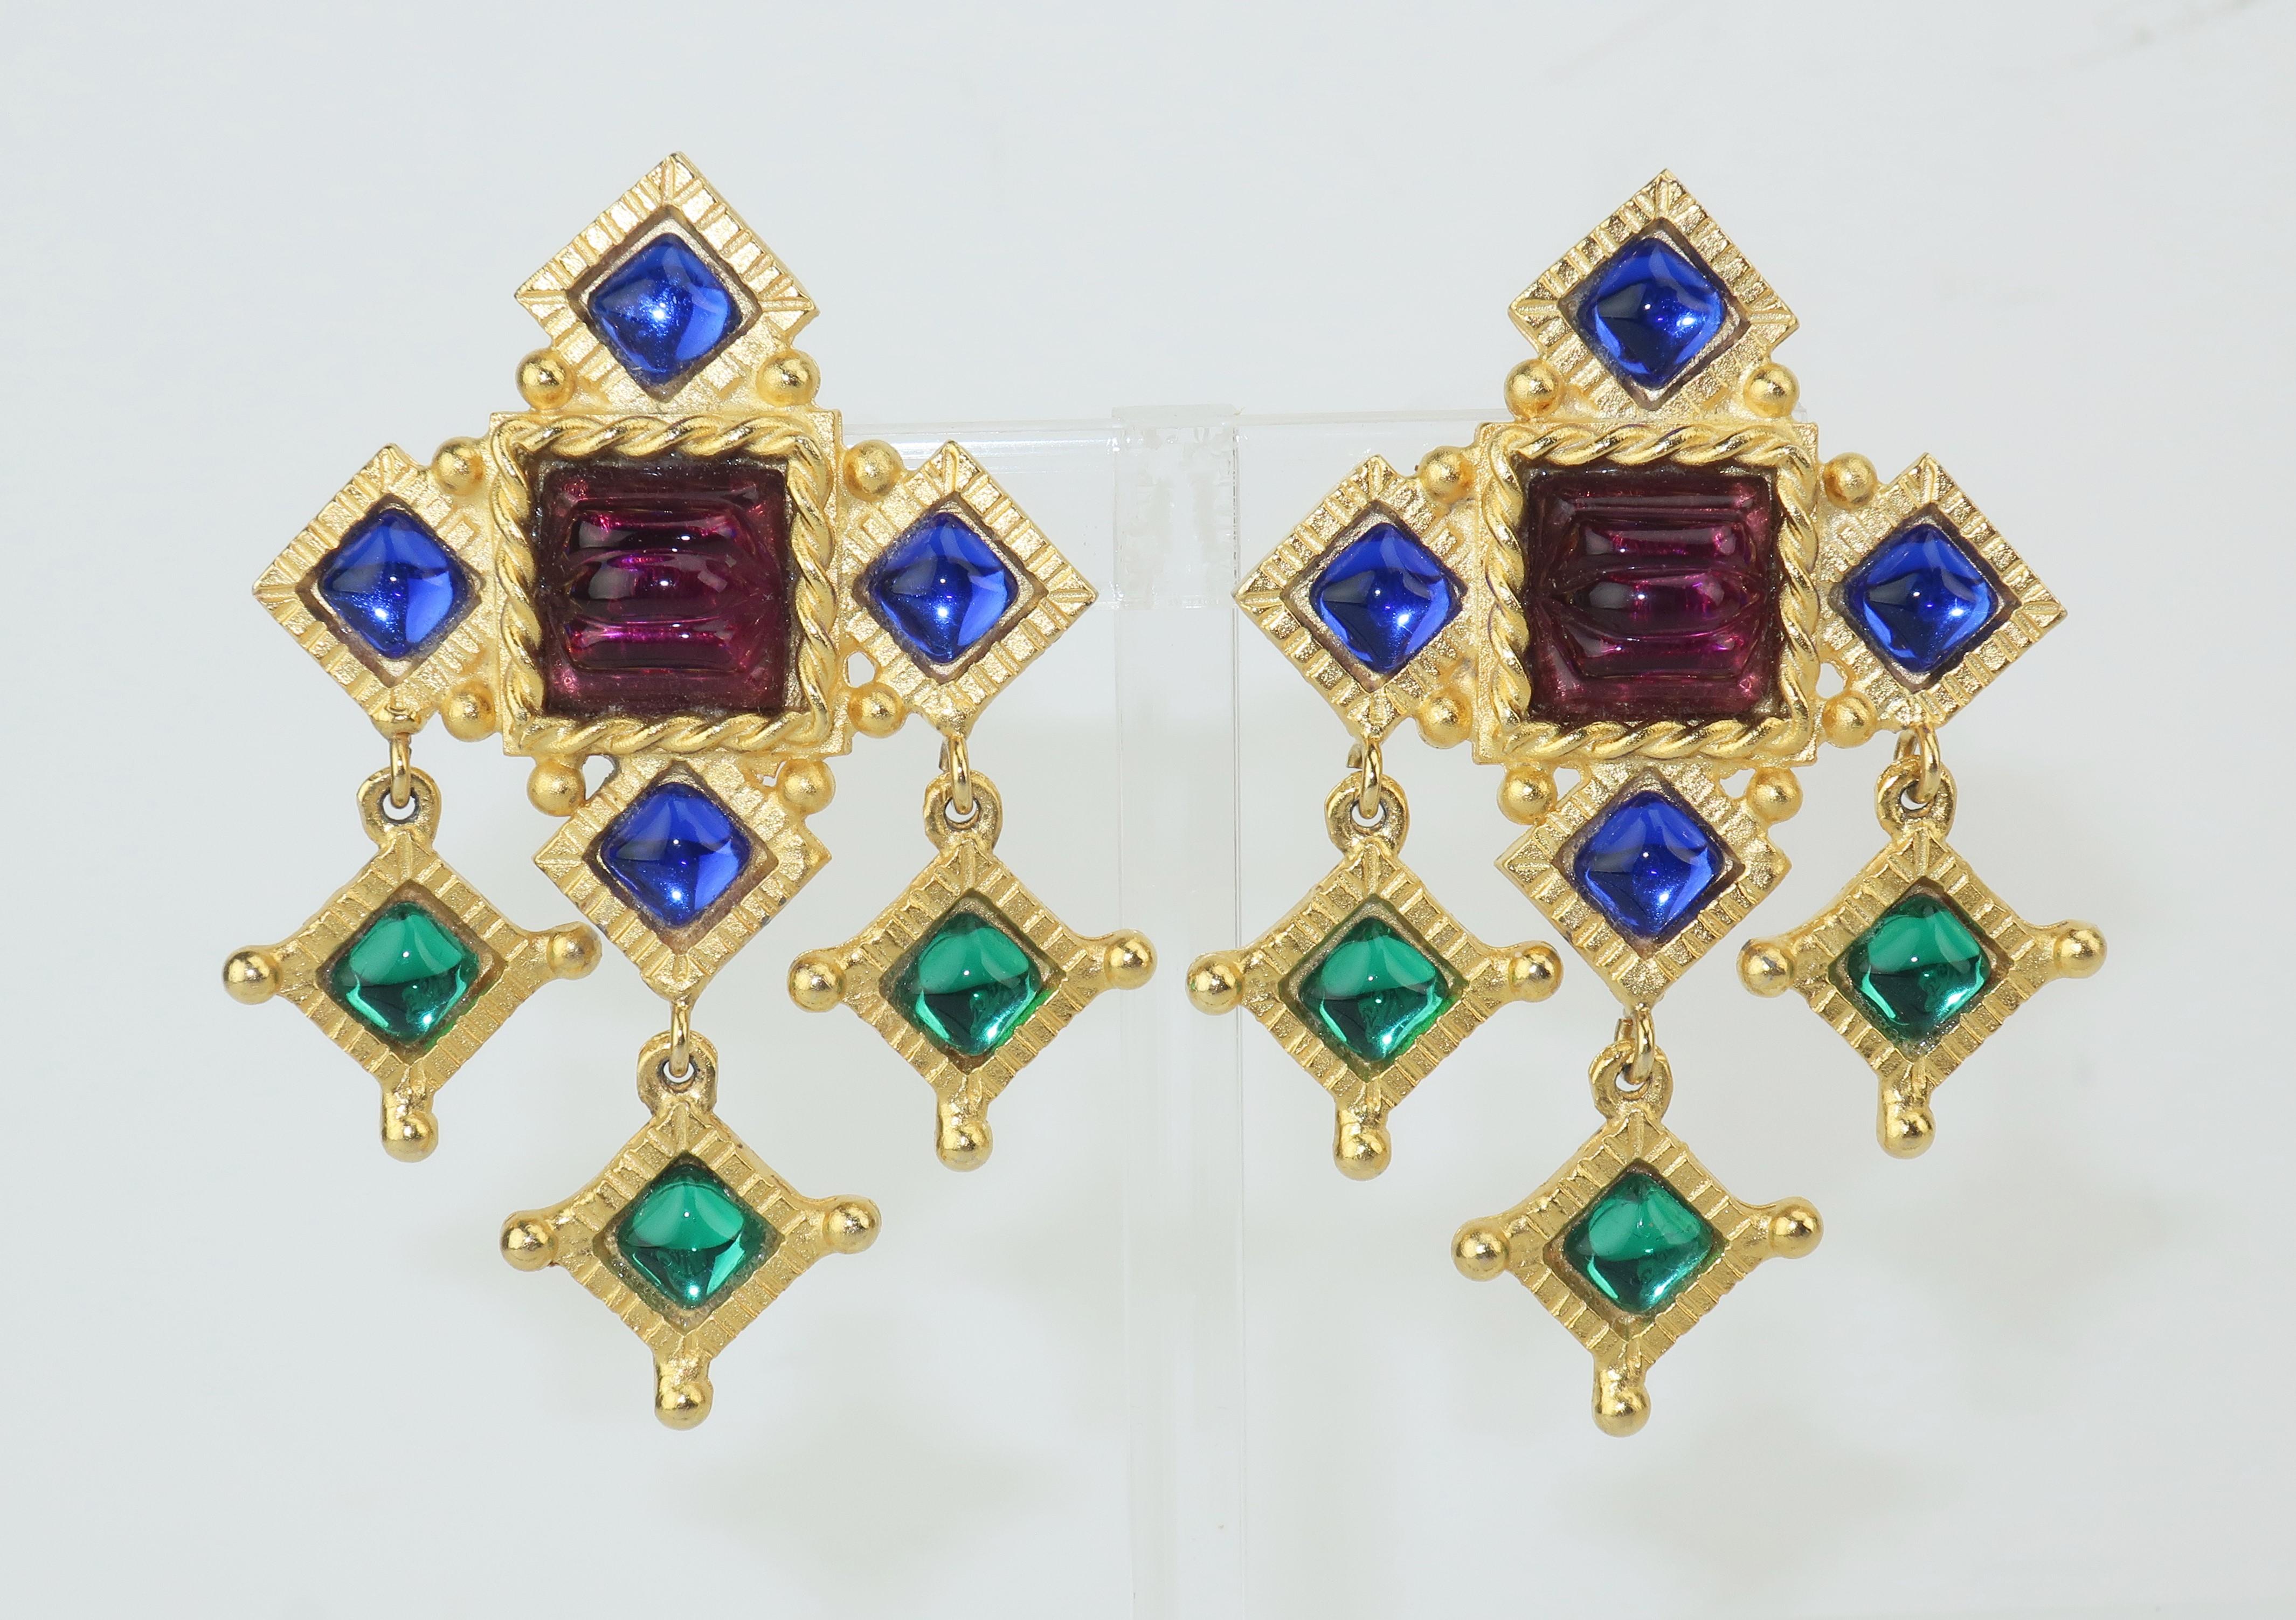 Byzantine style clip on earrings designed by Gerard Yosca in a matte gold with braided and incised details accented by amethyst purple, sapphire blue and emerald green cabochon glass.  Gorgeous!  Signed at the back and in excellent vintage